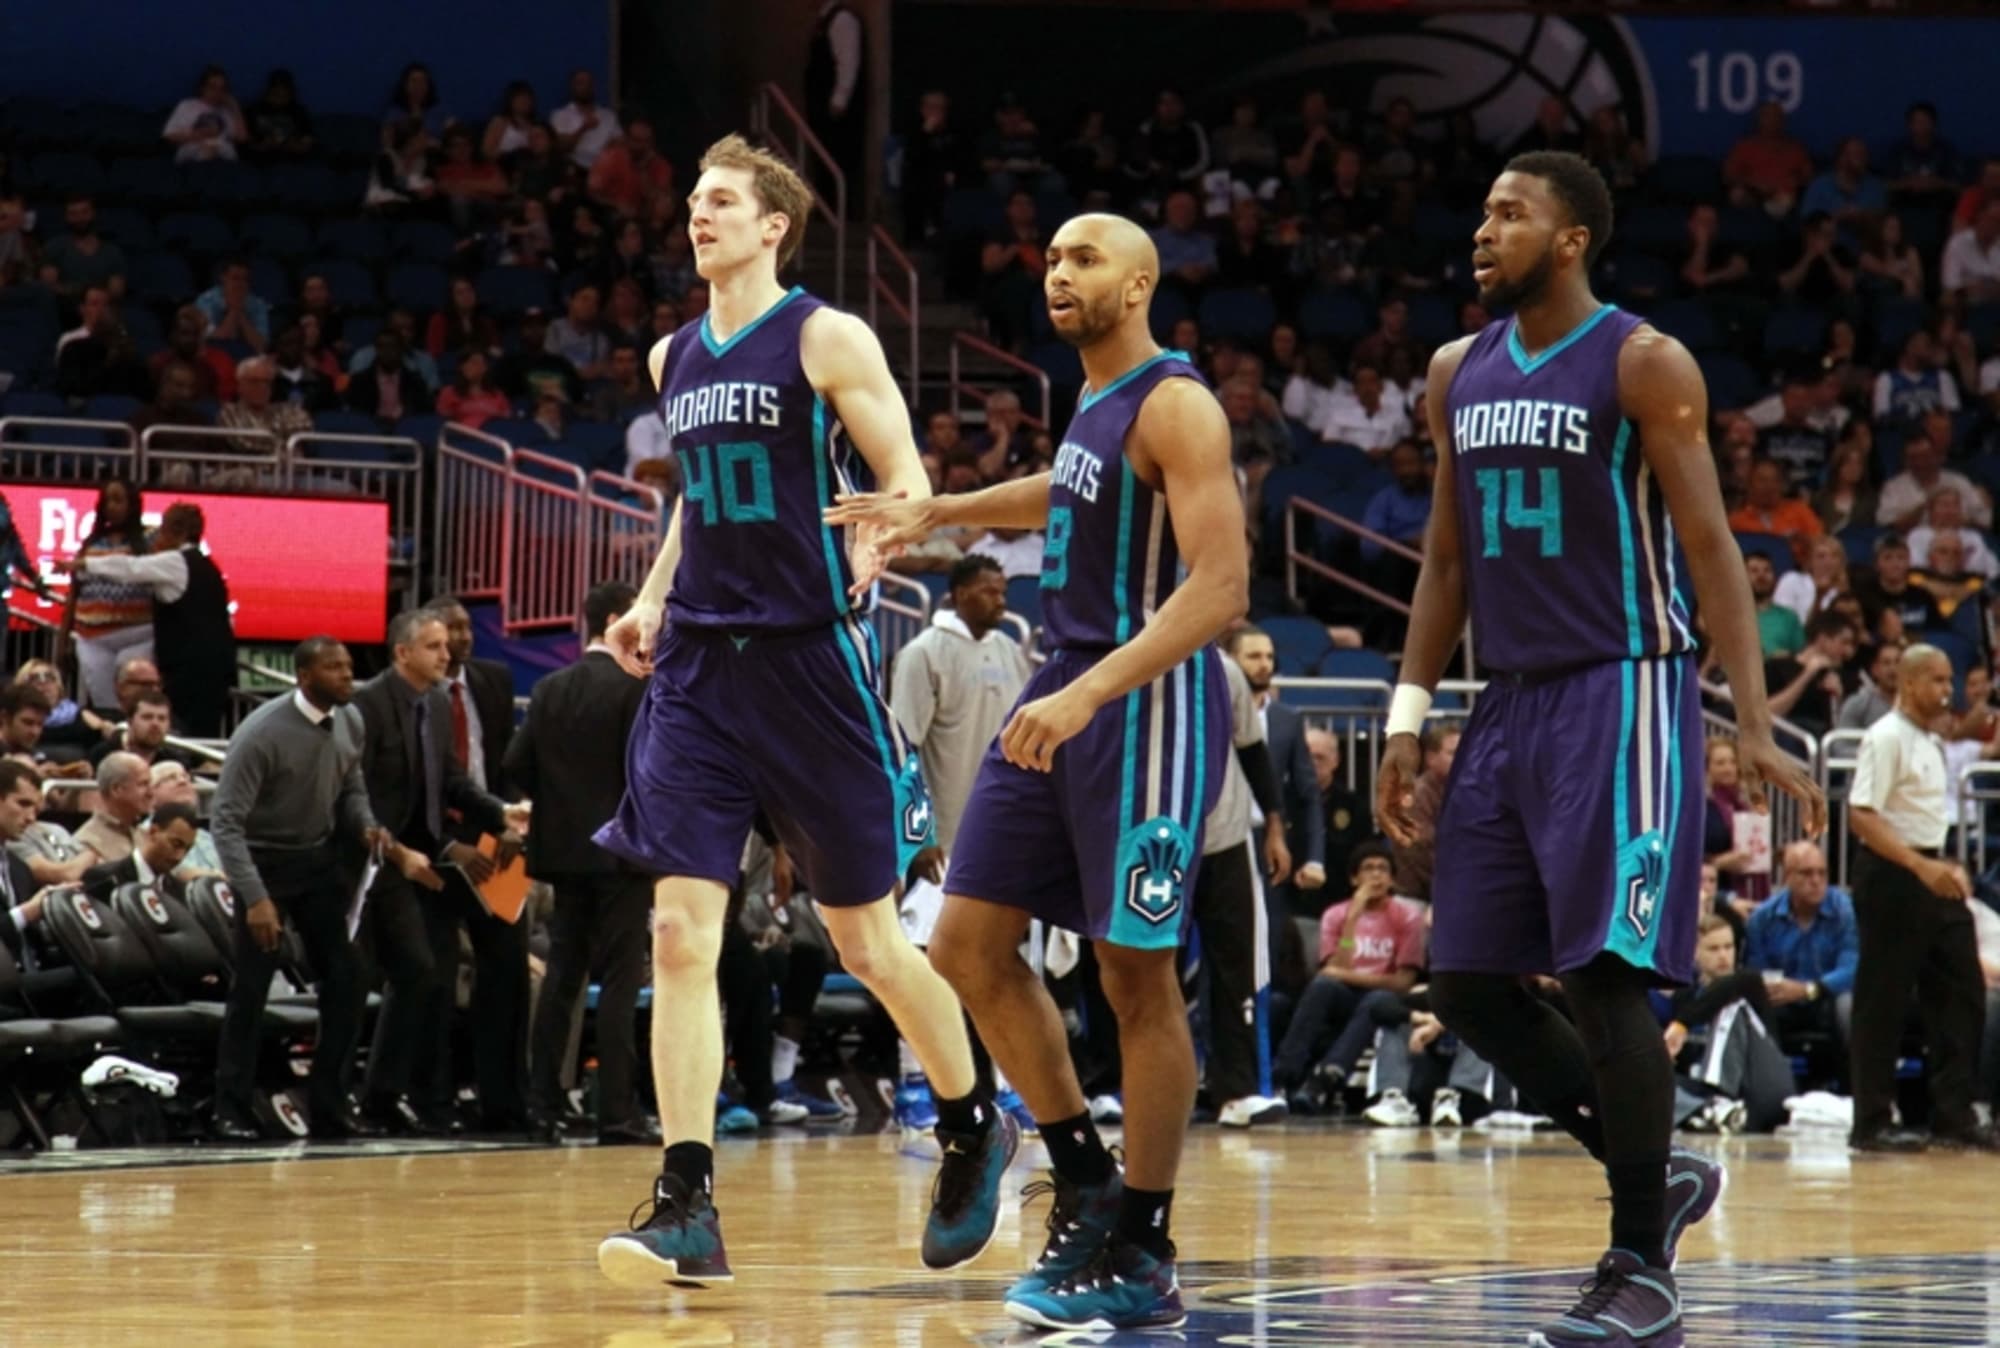 Possible Charlotte Hornets 2014-2015 Uniforms, Logo, and Court!